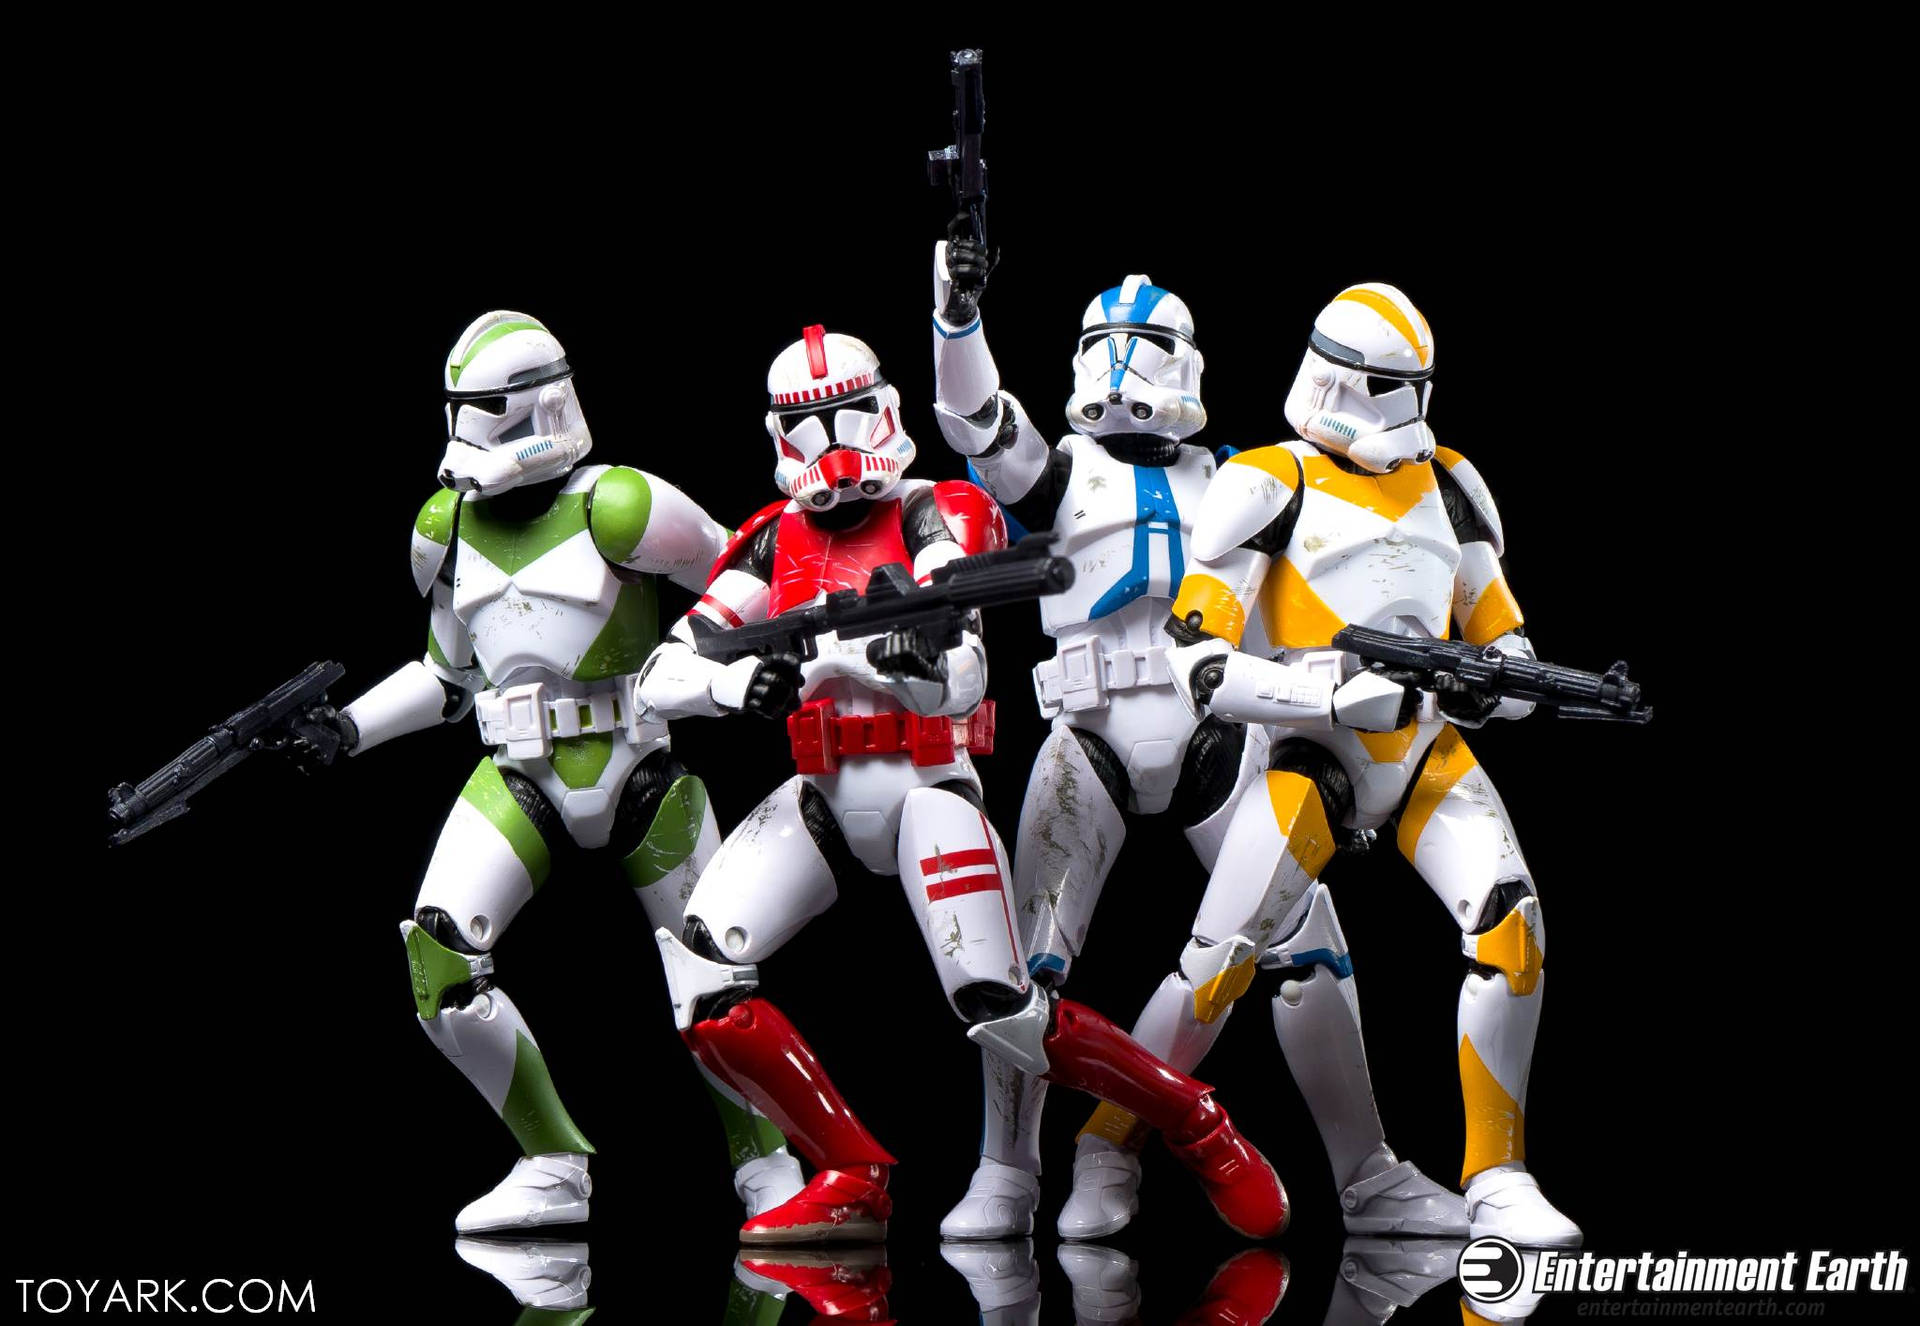 Clone Troopers are ready for battle Wallpaper